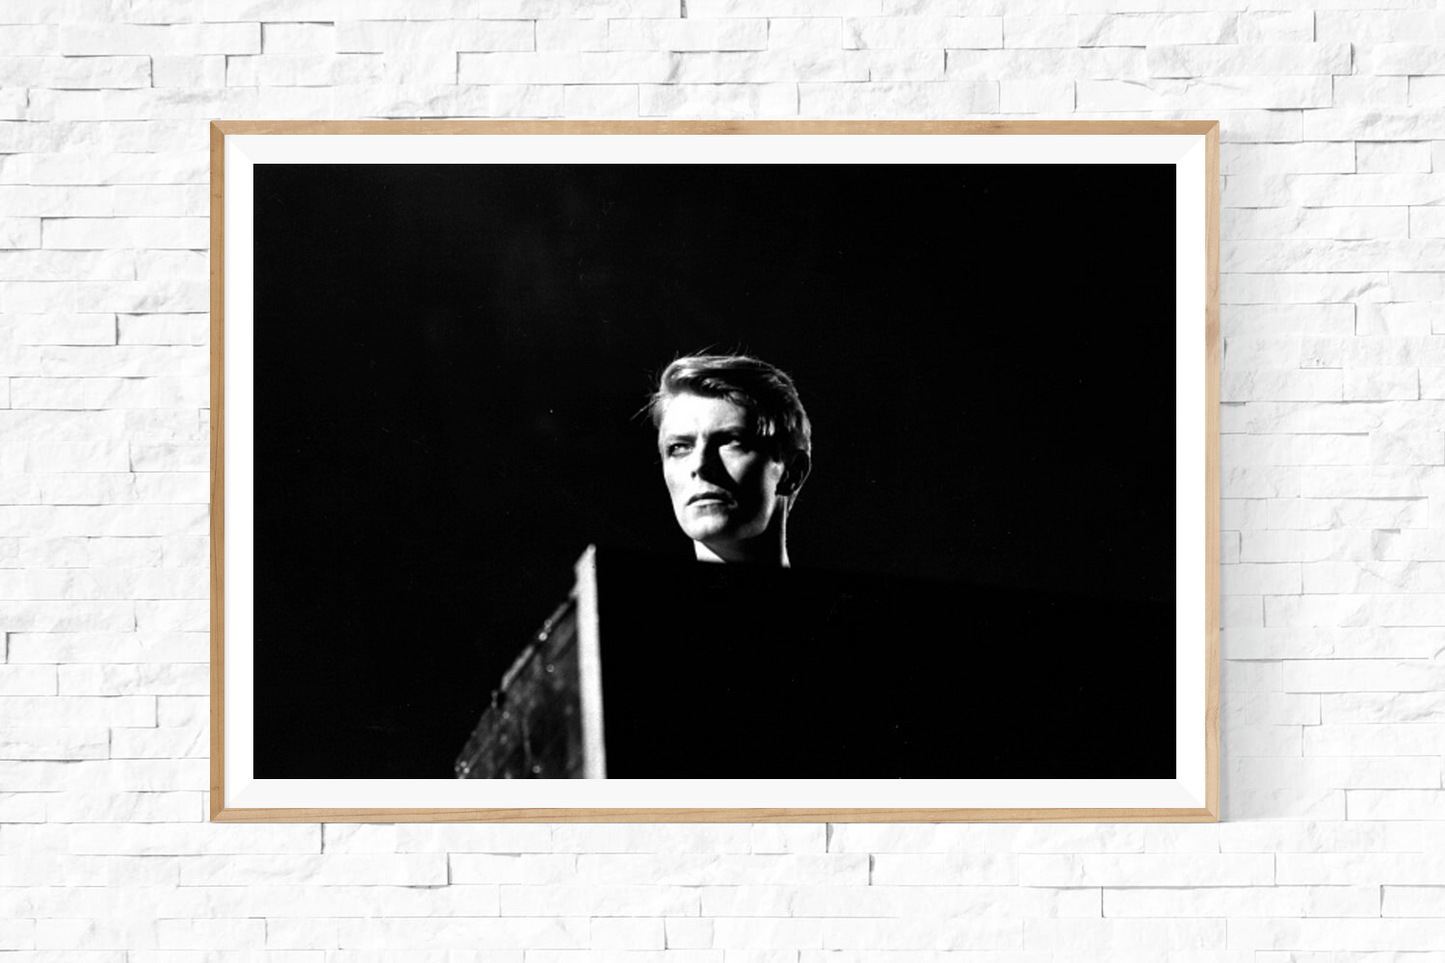 Framed: David Bowie Portrait photo for sale Getty Images Gallery